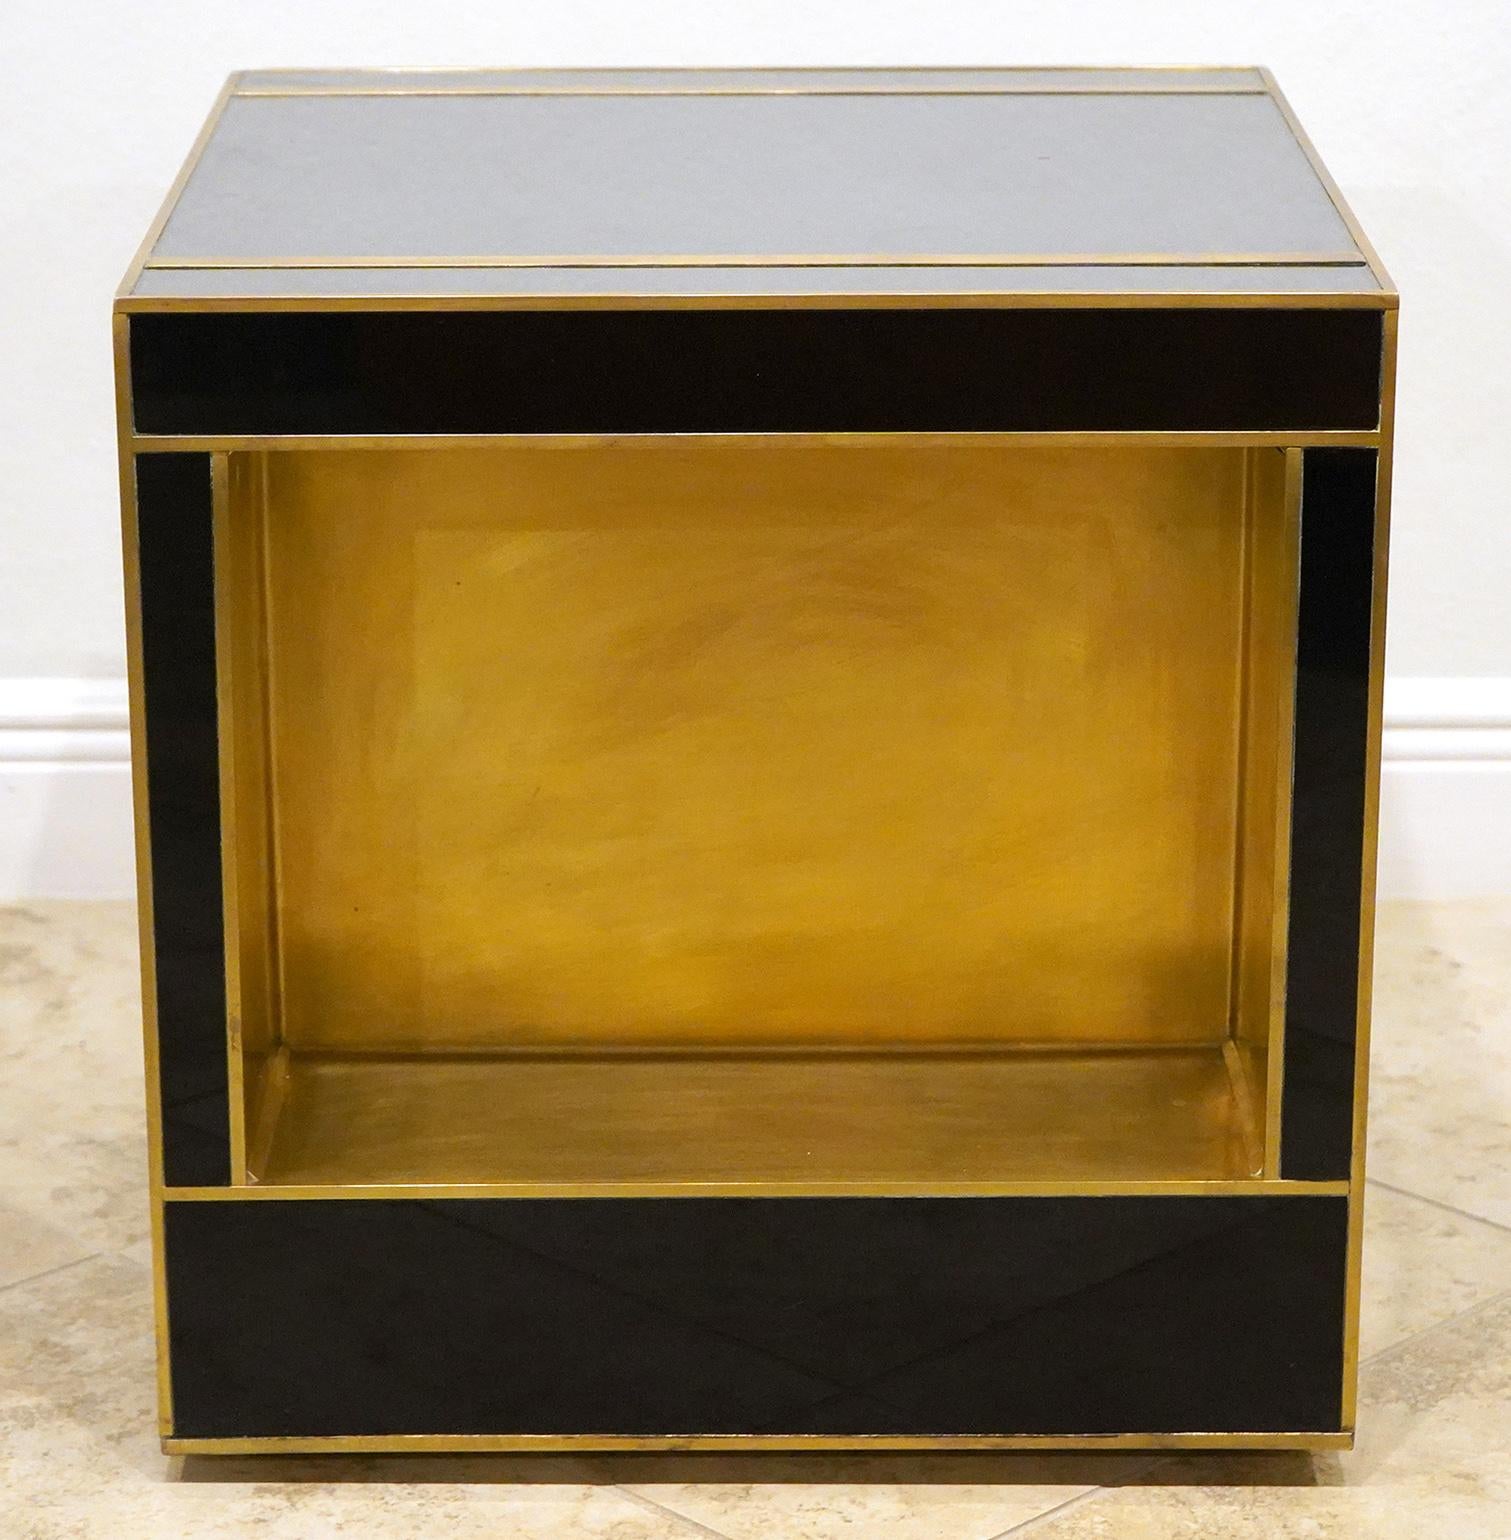 Custom made Italian brass and glass side or end table. Modern cube design with storage cutouts on two sides for storage. Quality made. We have a second table in a different color.